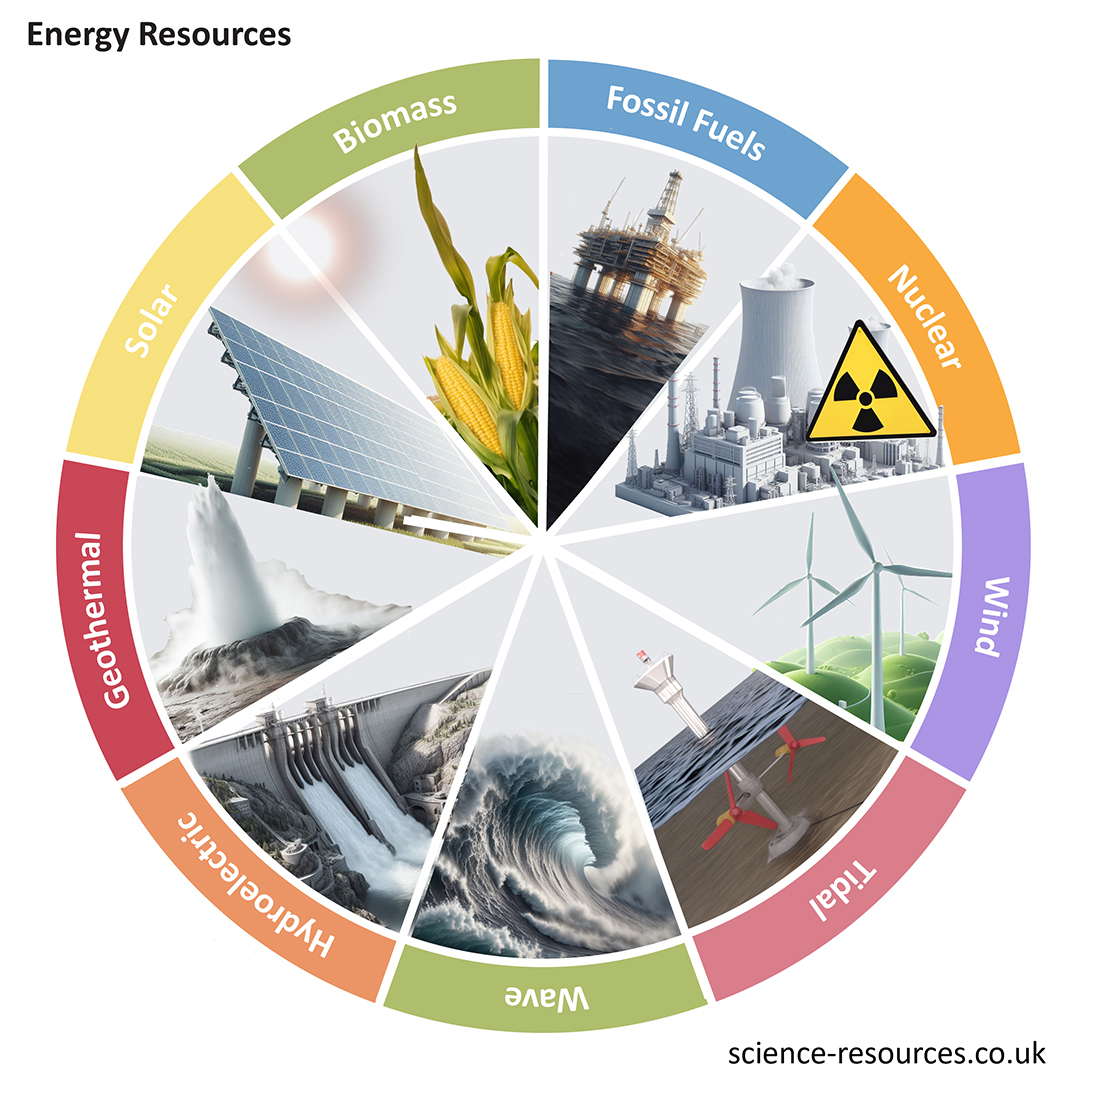 The image you sent is a pie chart showing different types of energy resources. It illustrates how energy can be obtained from various sources such as solar, biomass, fossil fuels, nuclear, wind, wave, and geothermal.